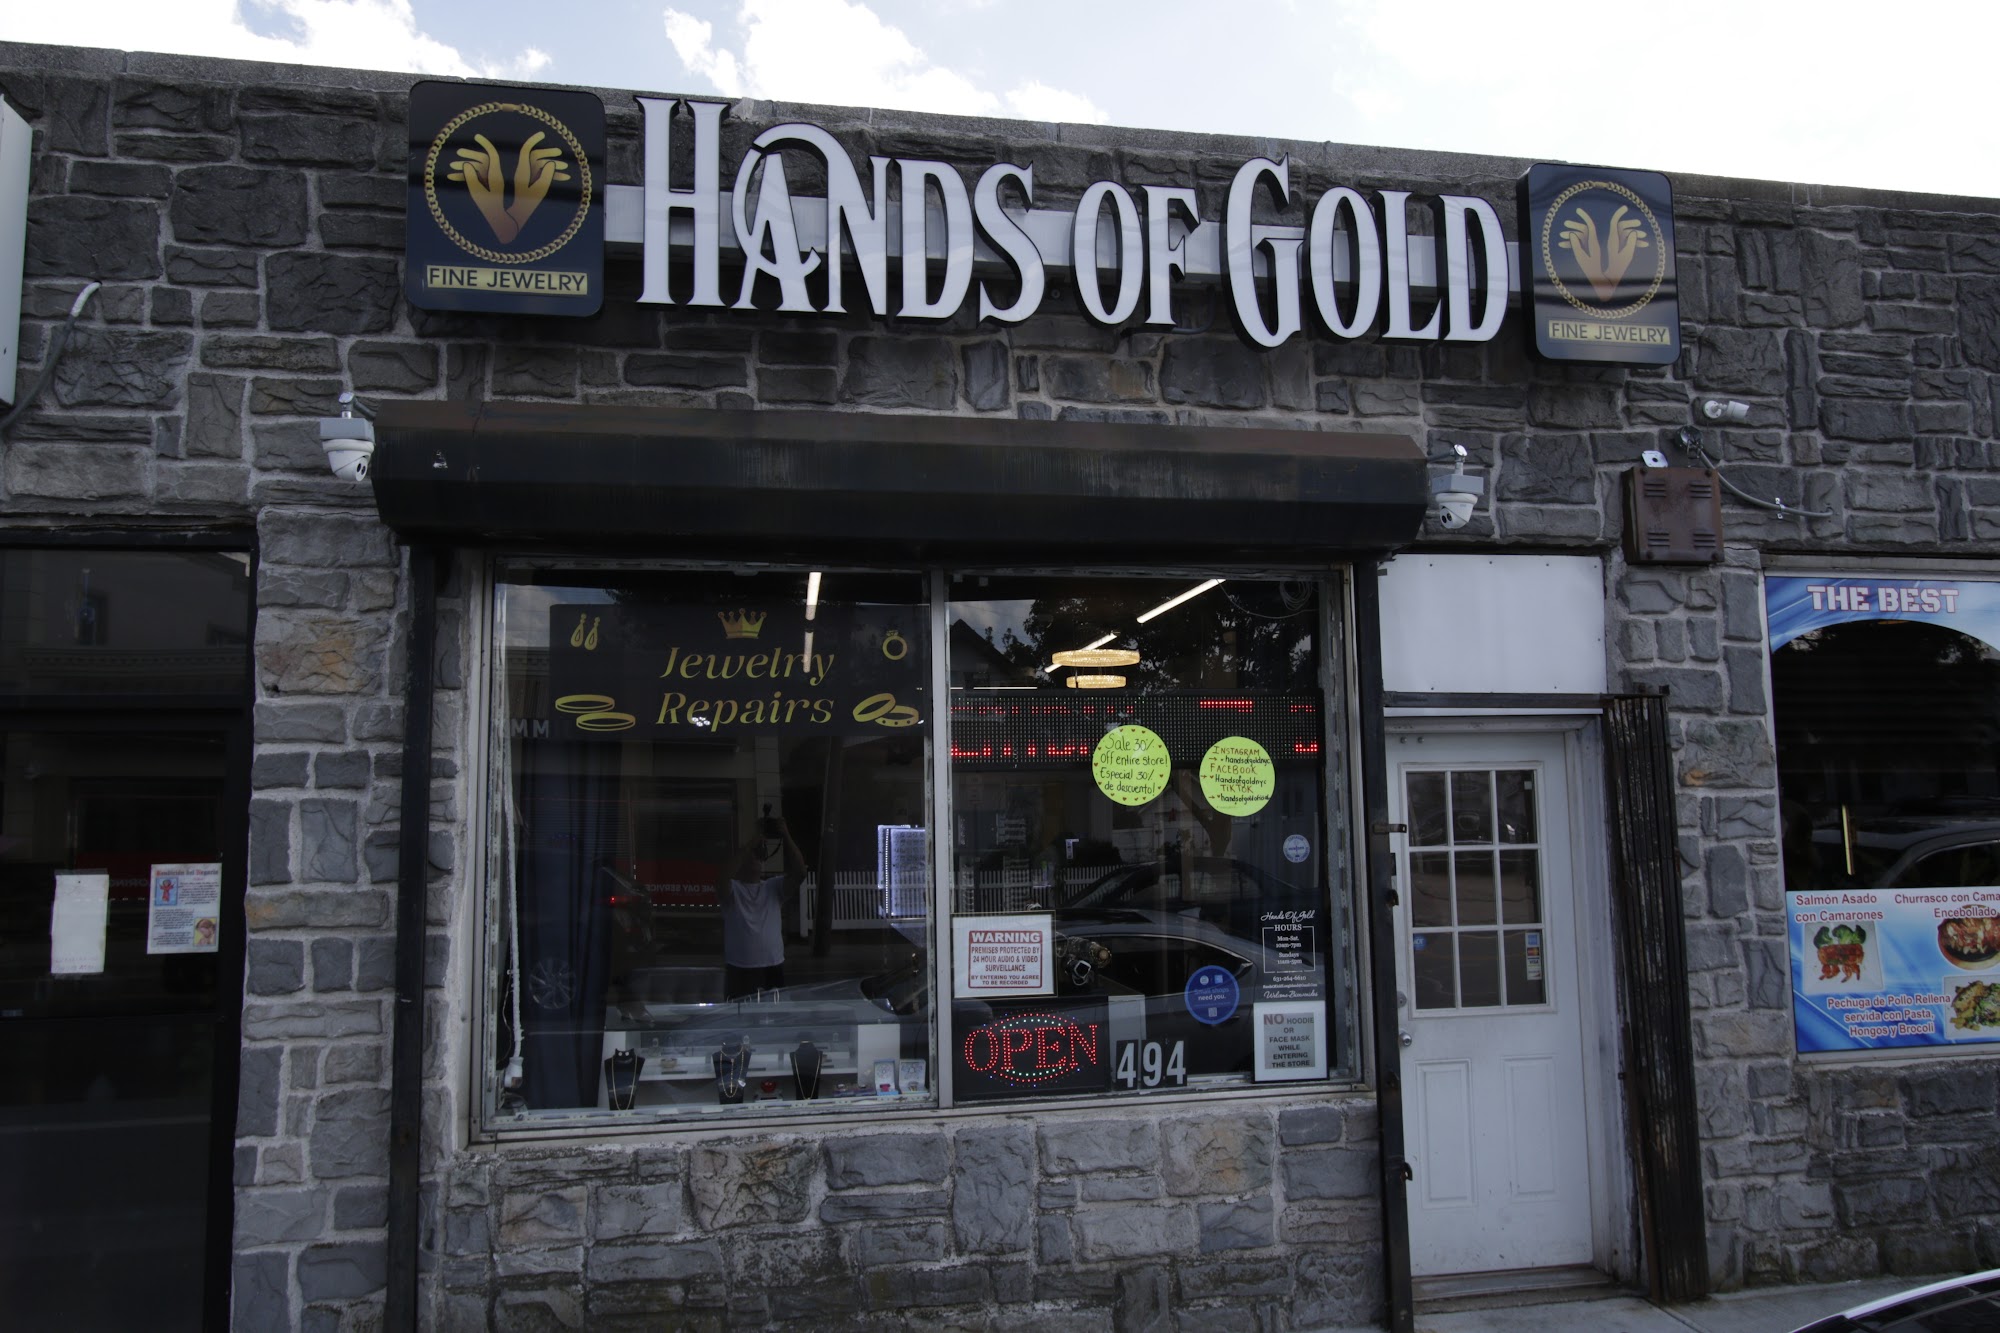 Hands of Gold Jewelry and Repairs 494 Oak St, Copiague New York 11726